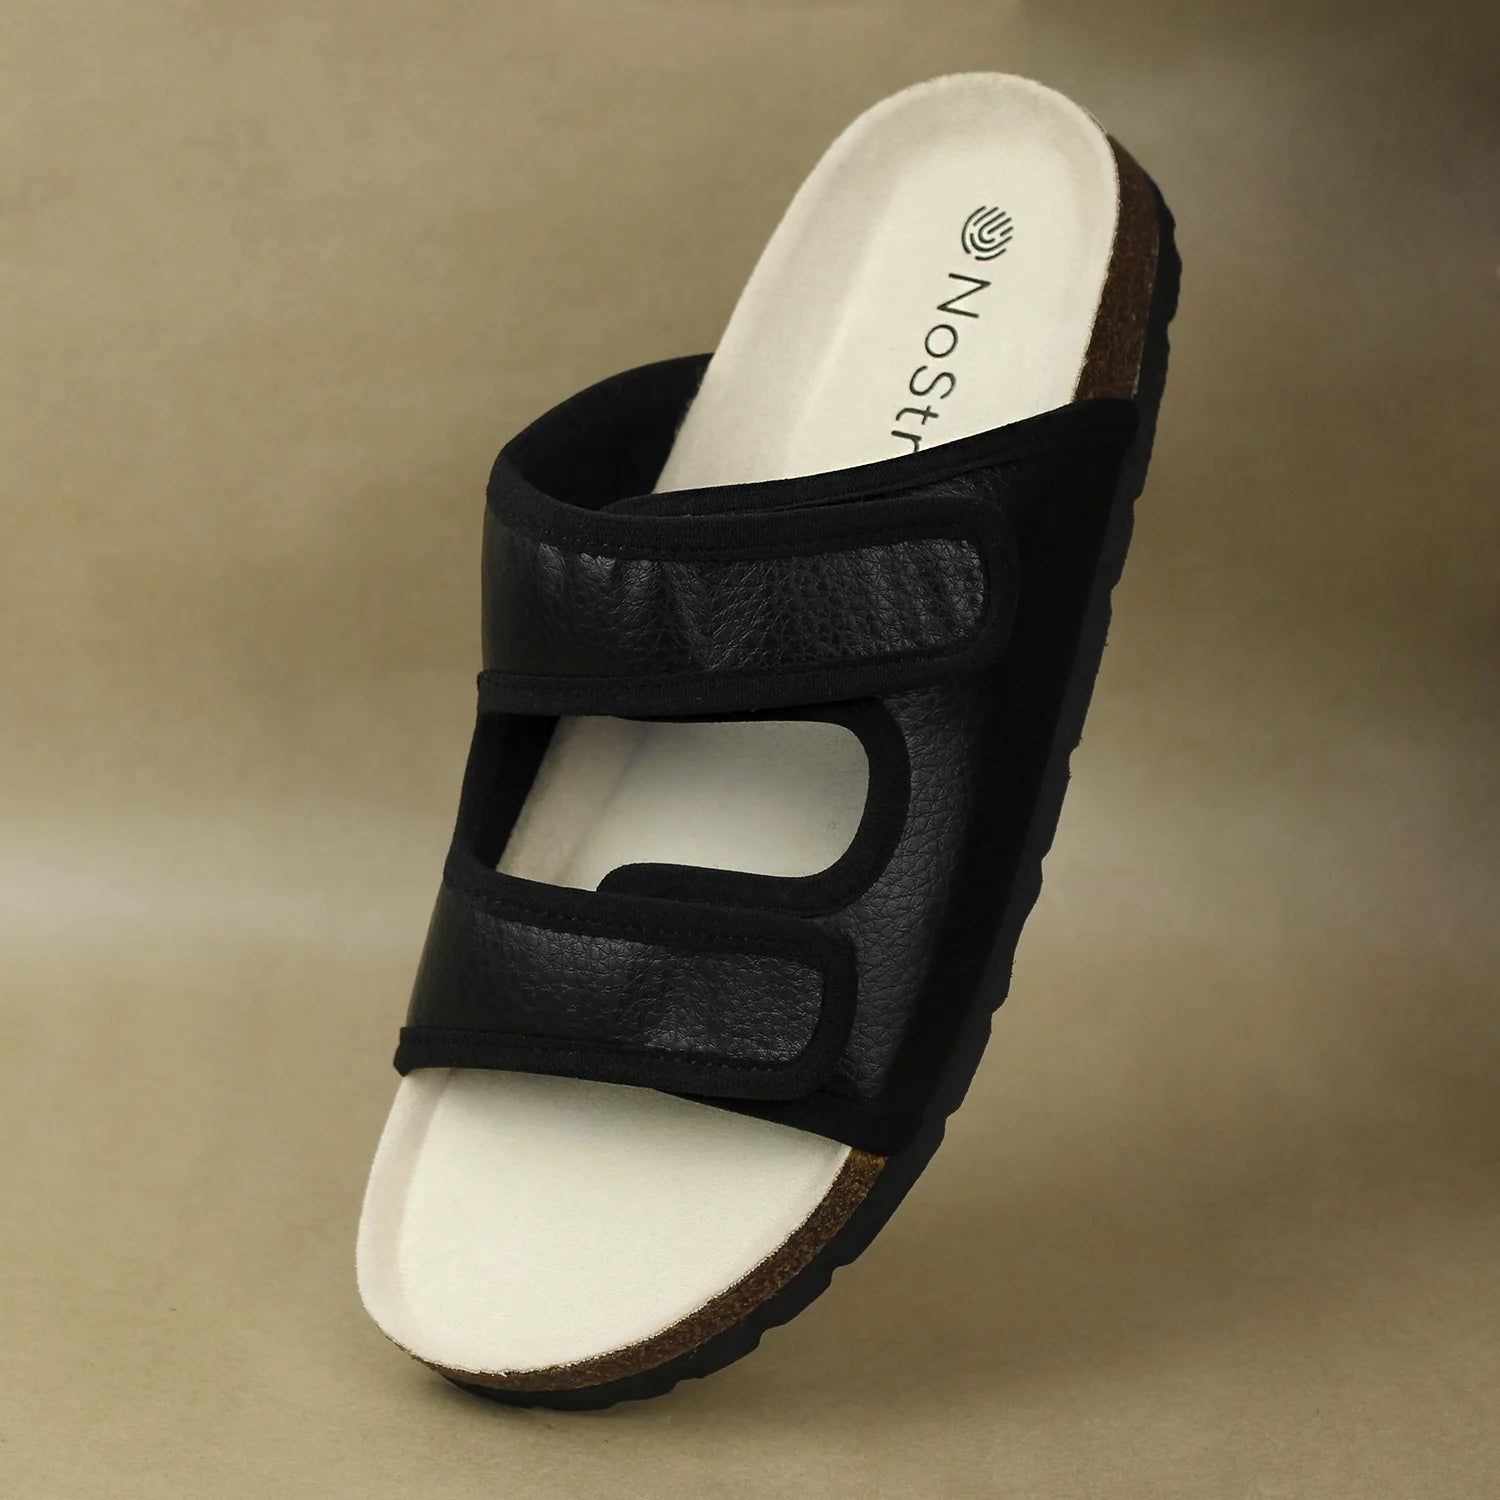 Black cork sandals suitable for narrow and wide feet